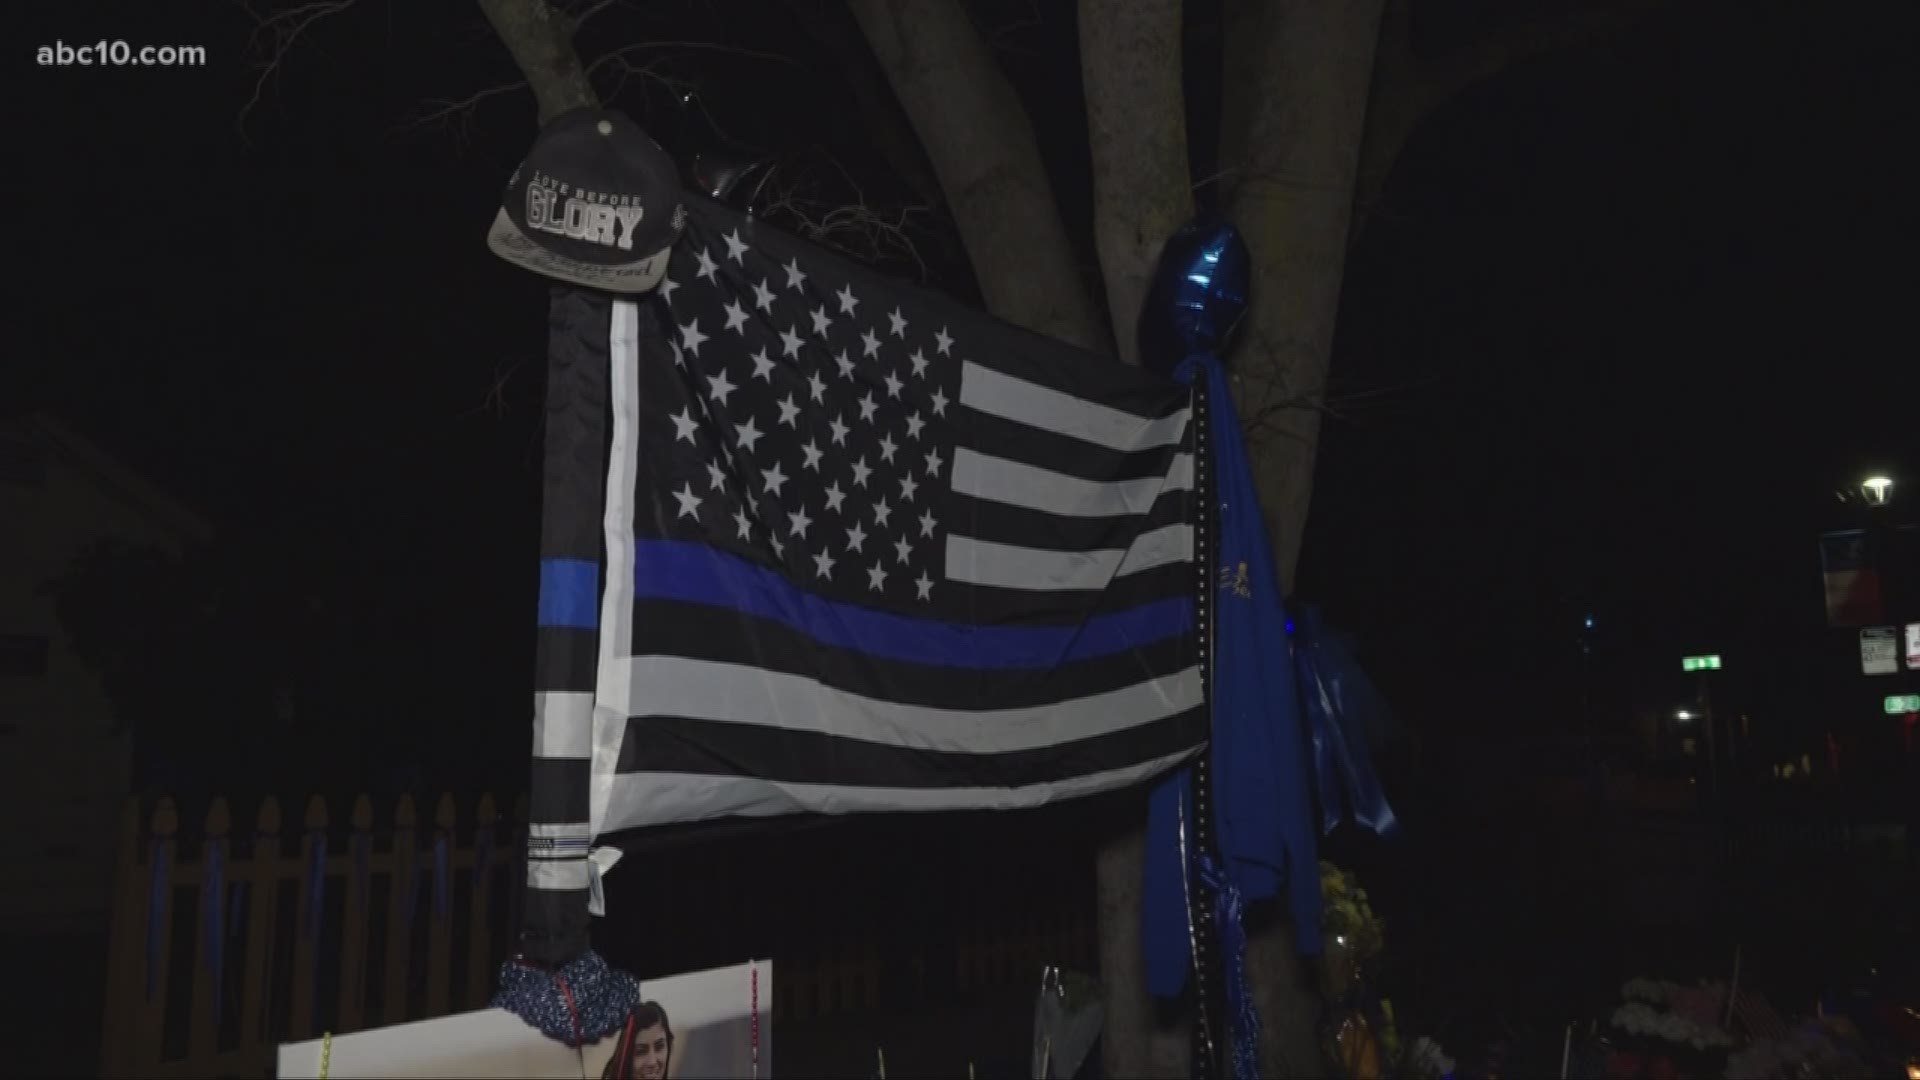 Days after the ambush and untimely death of officer Natalie Corona, the Davis community still mourns her loss.